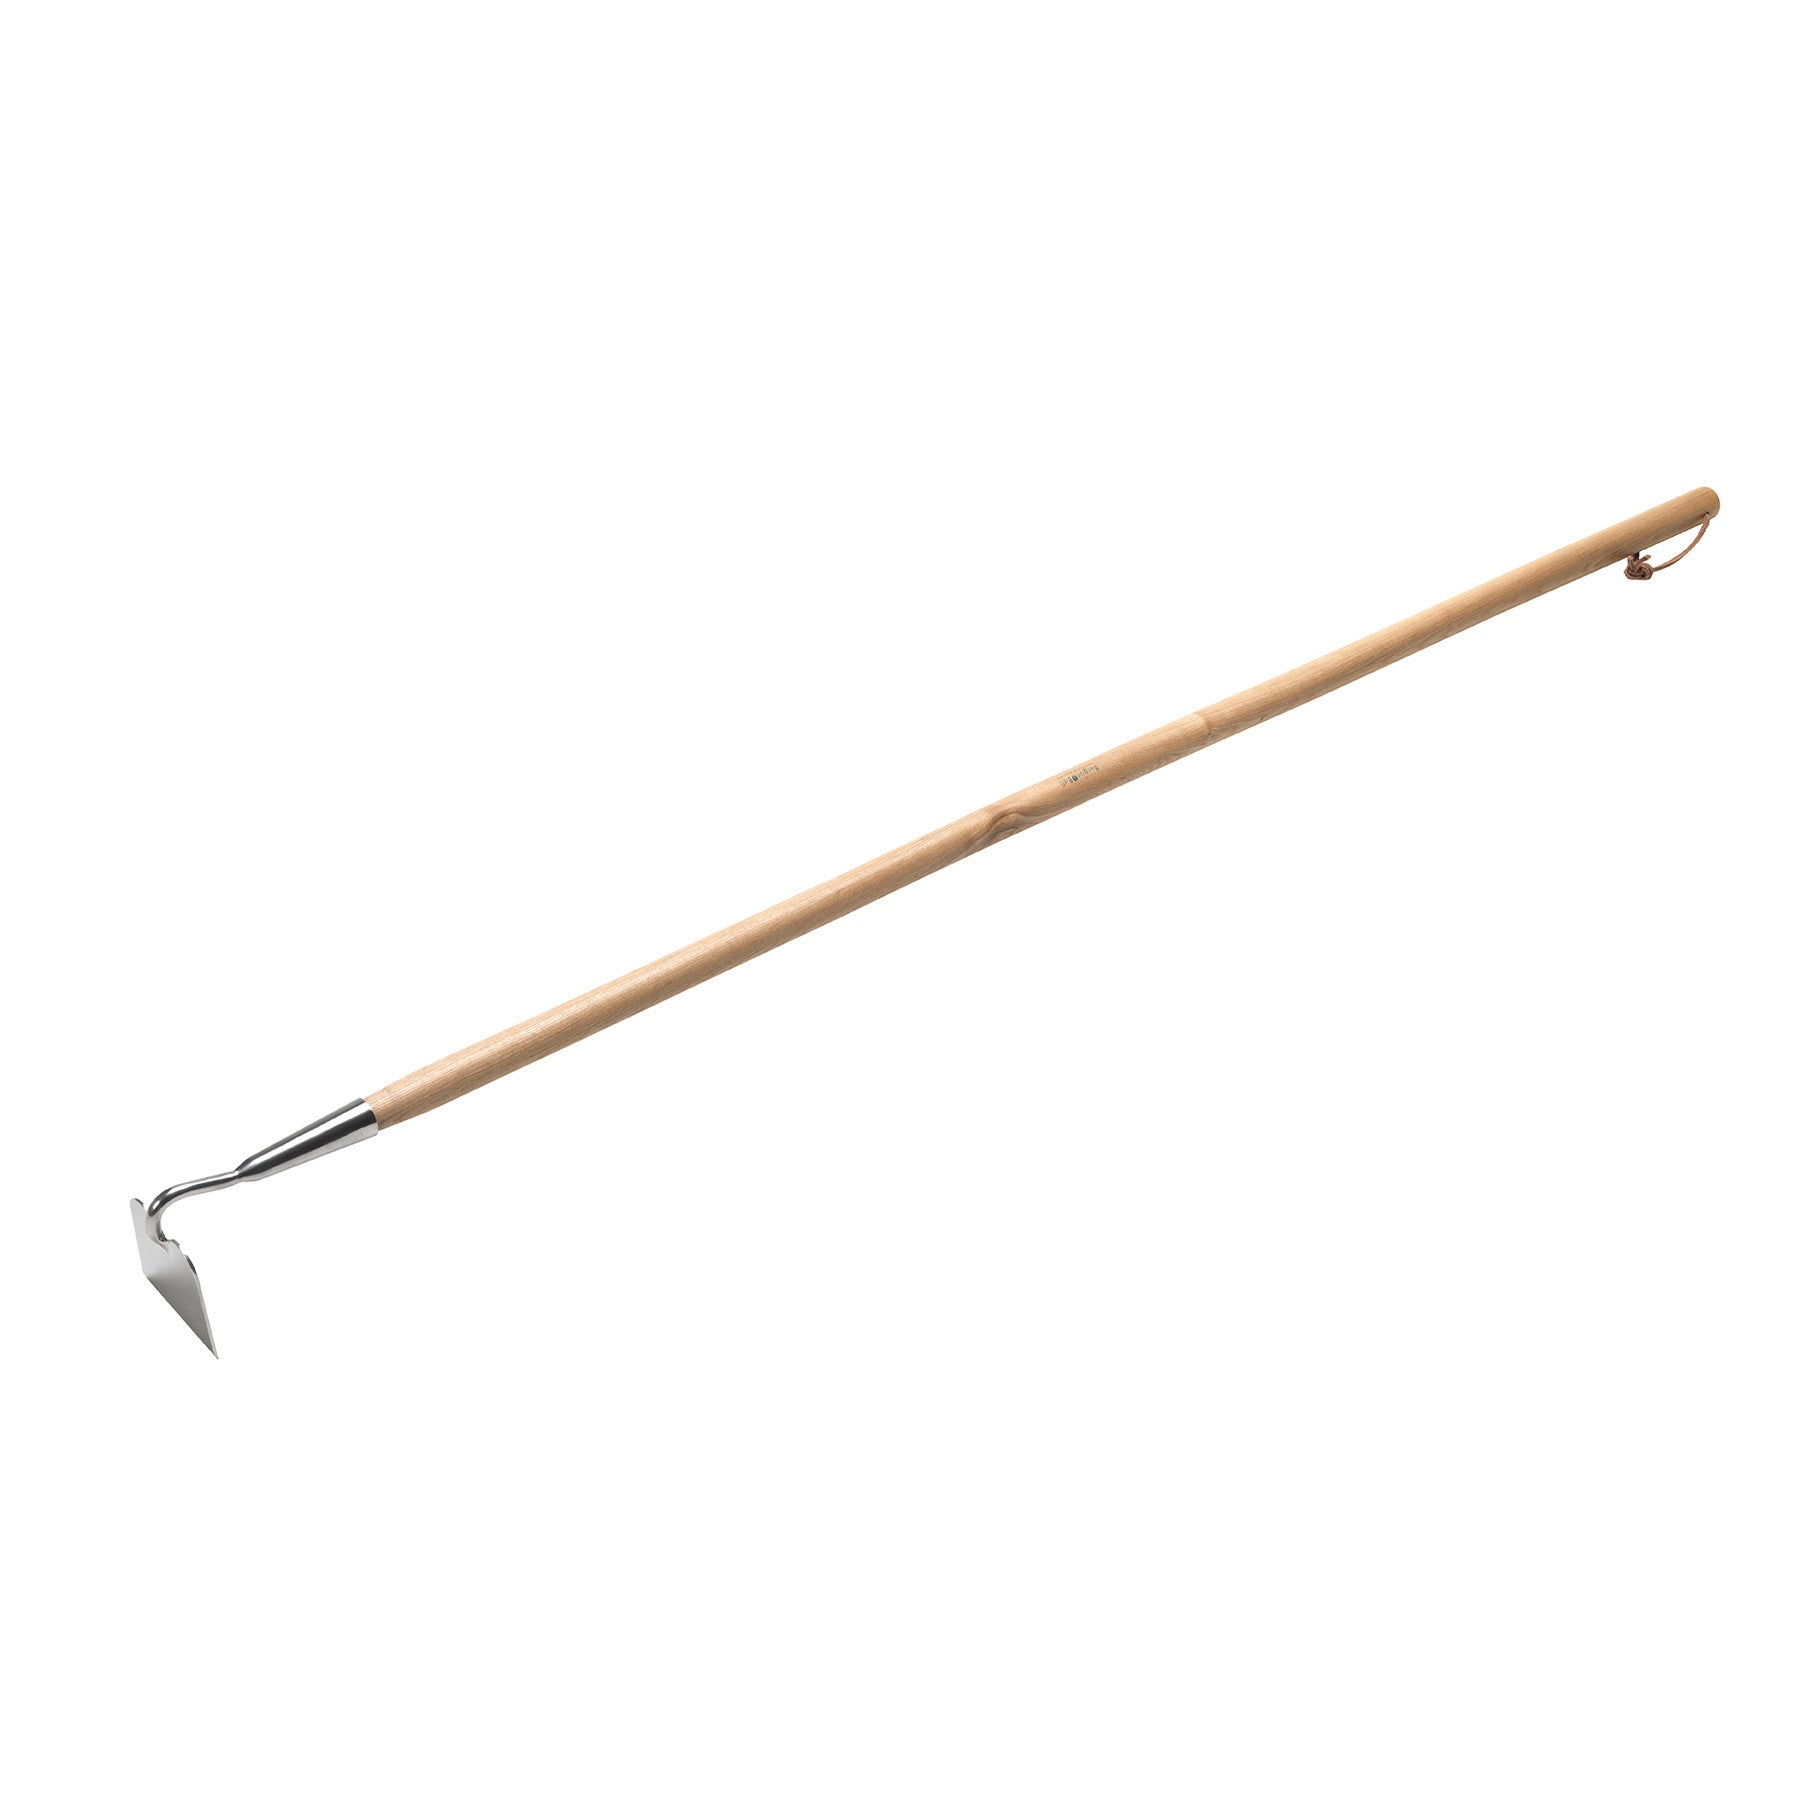 Stainless Steel - Long Handled Draw Hoe